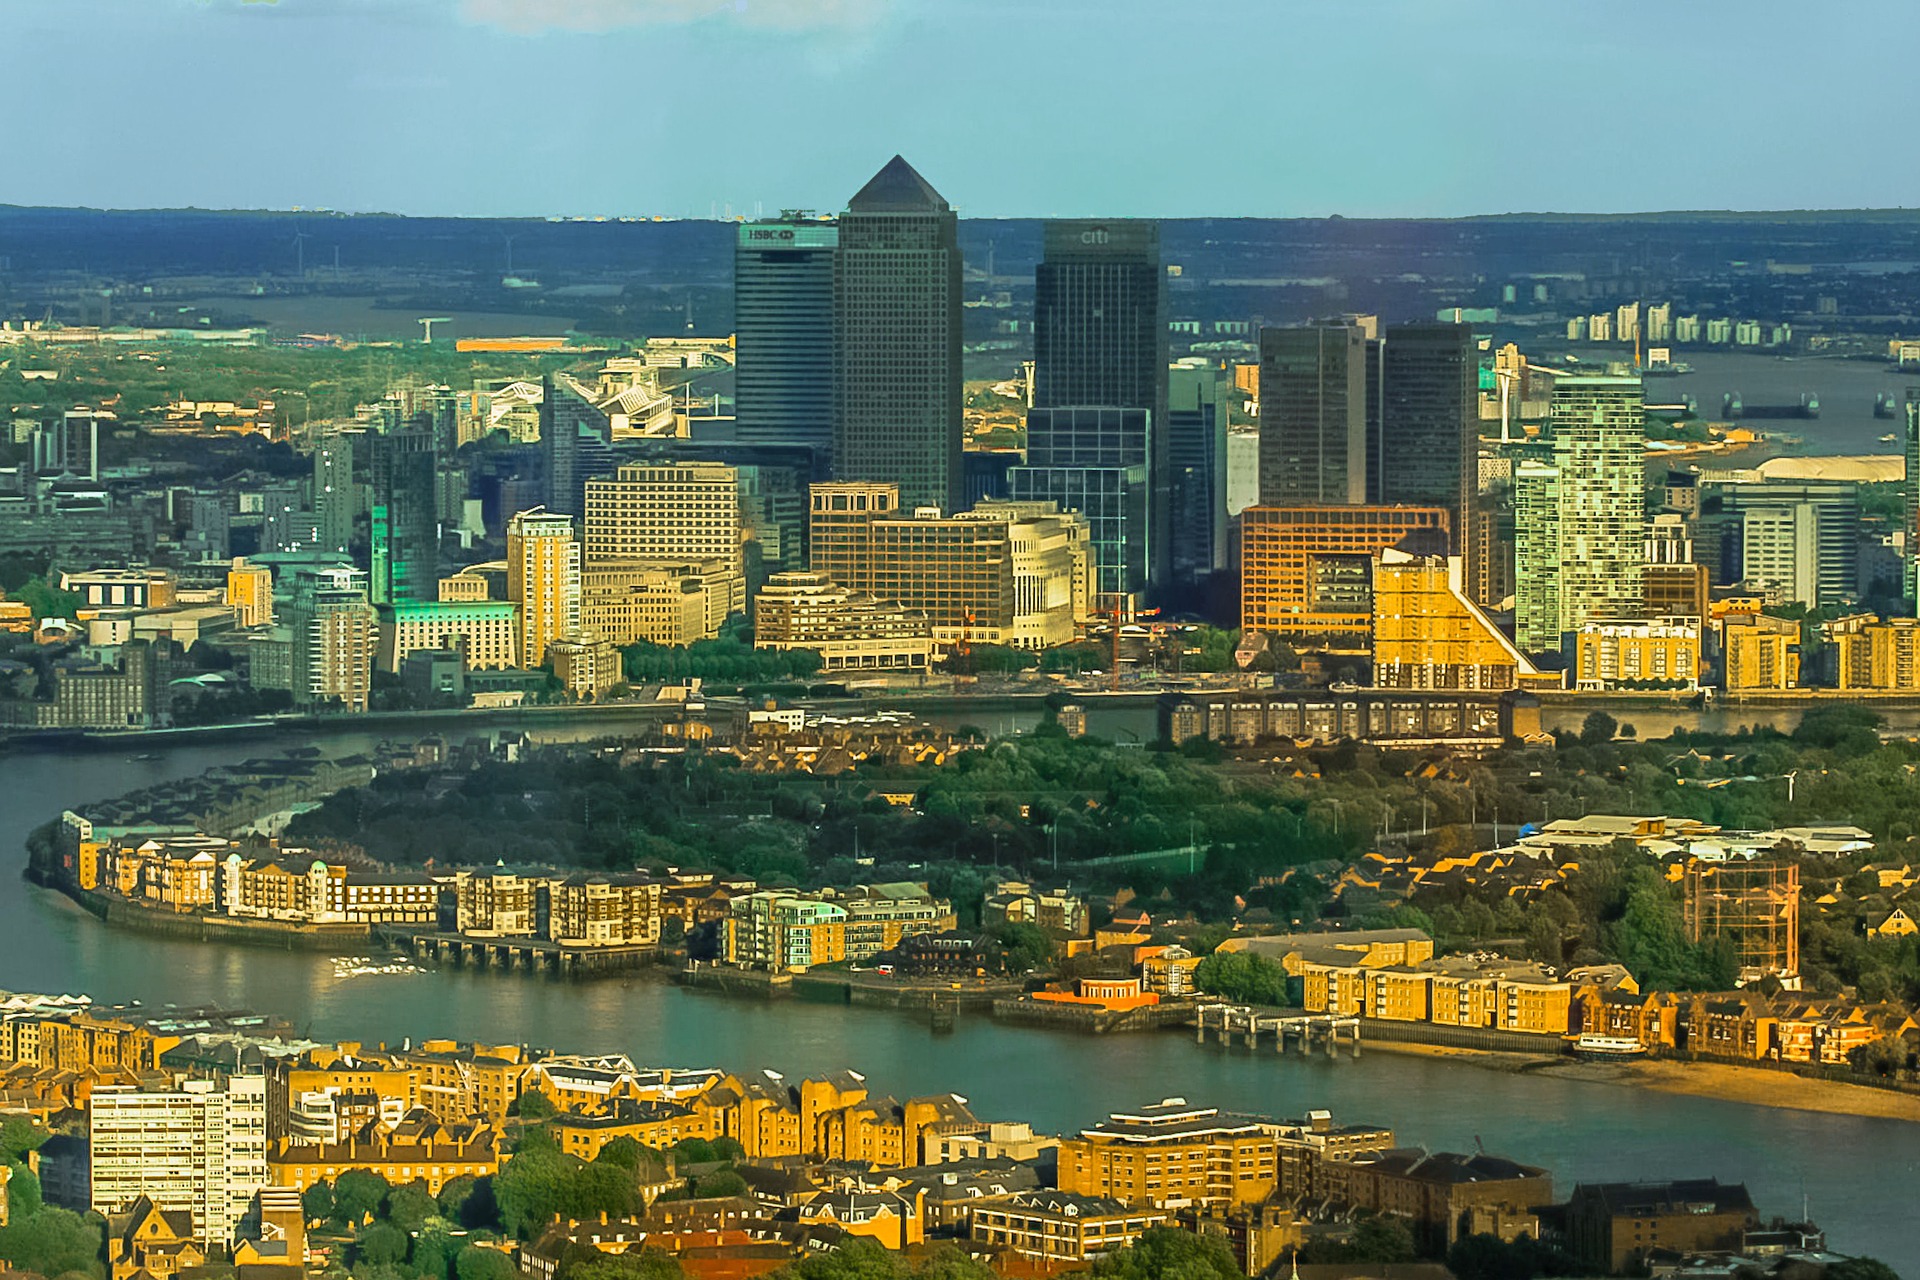 Aerial view of Canary Wharf, London, UK